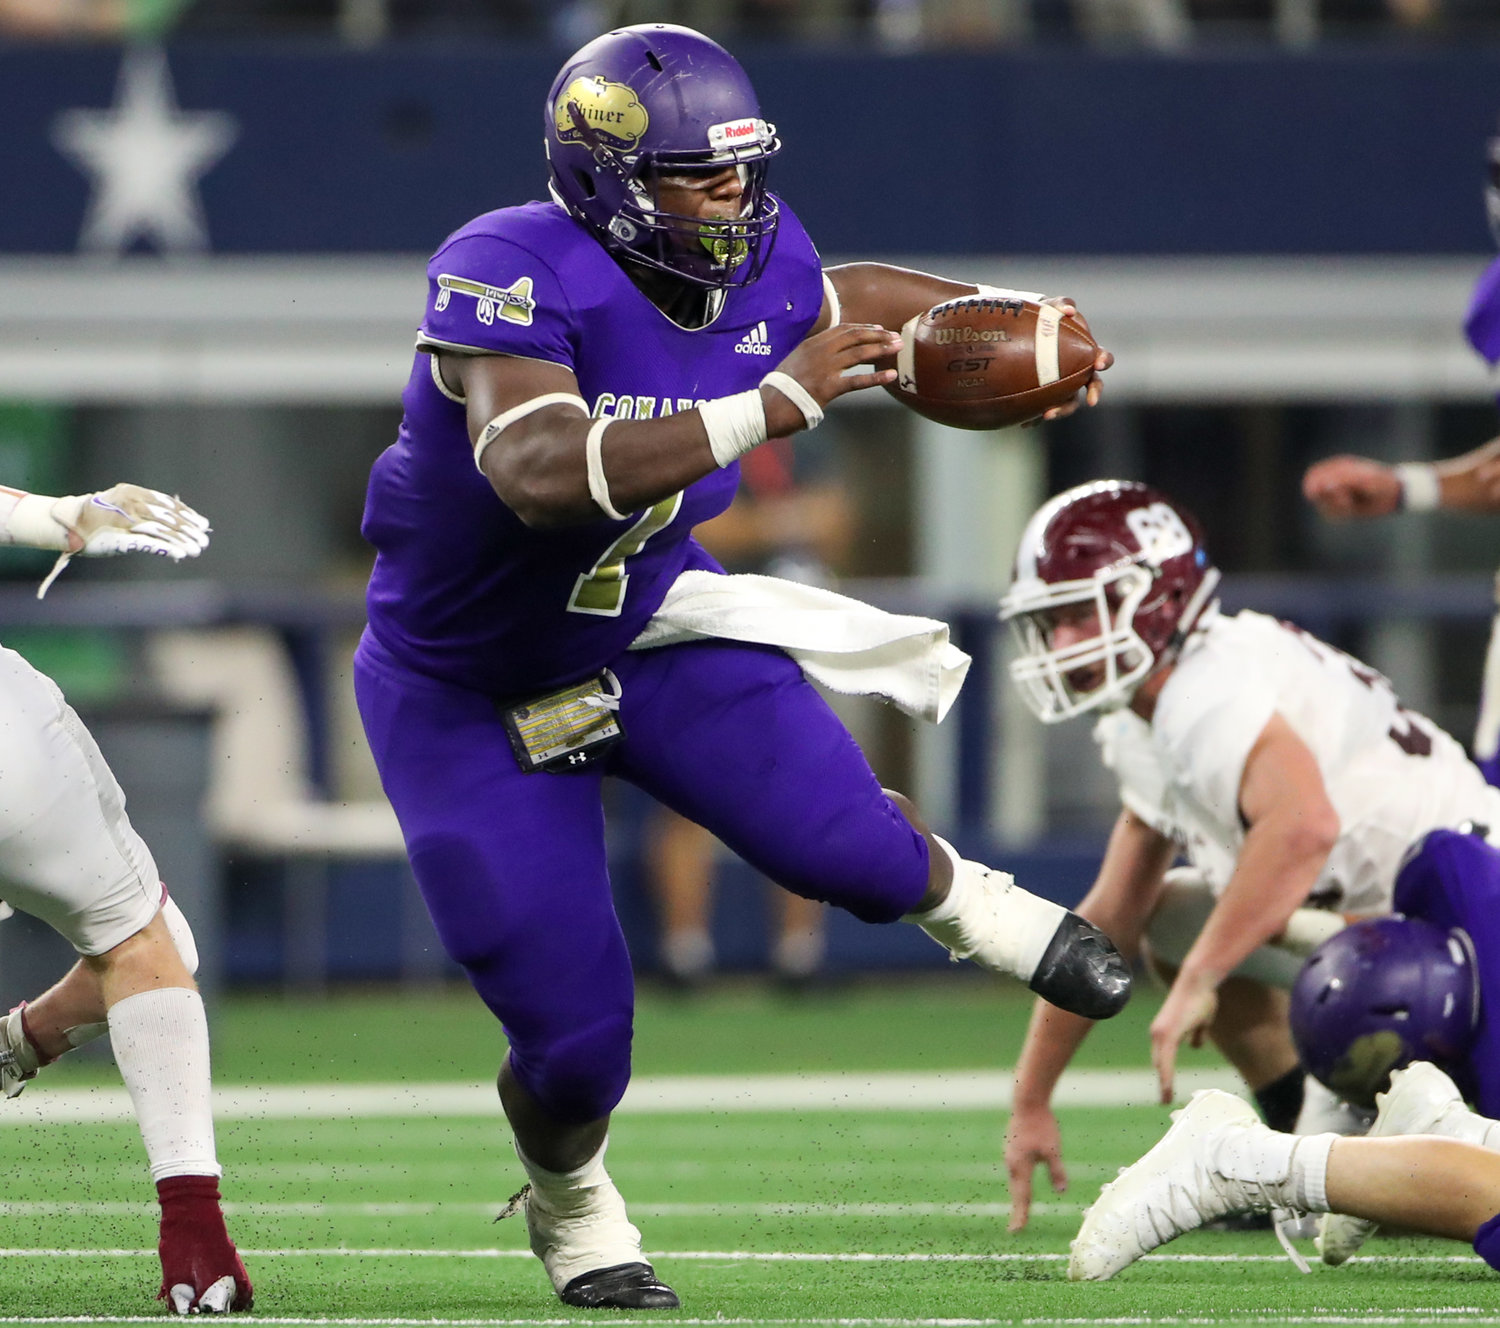 Shiner Comanches senior Doug Brooks (1) carries the ball during the Class 2A Division I state football championship game between Shiner and Hawley on December 15, 2021 in Arlington, Texas.